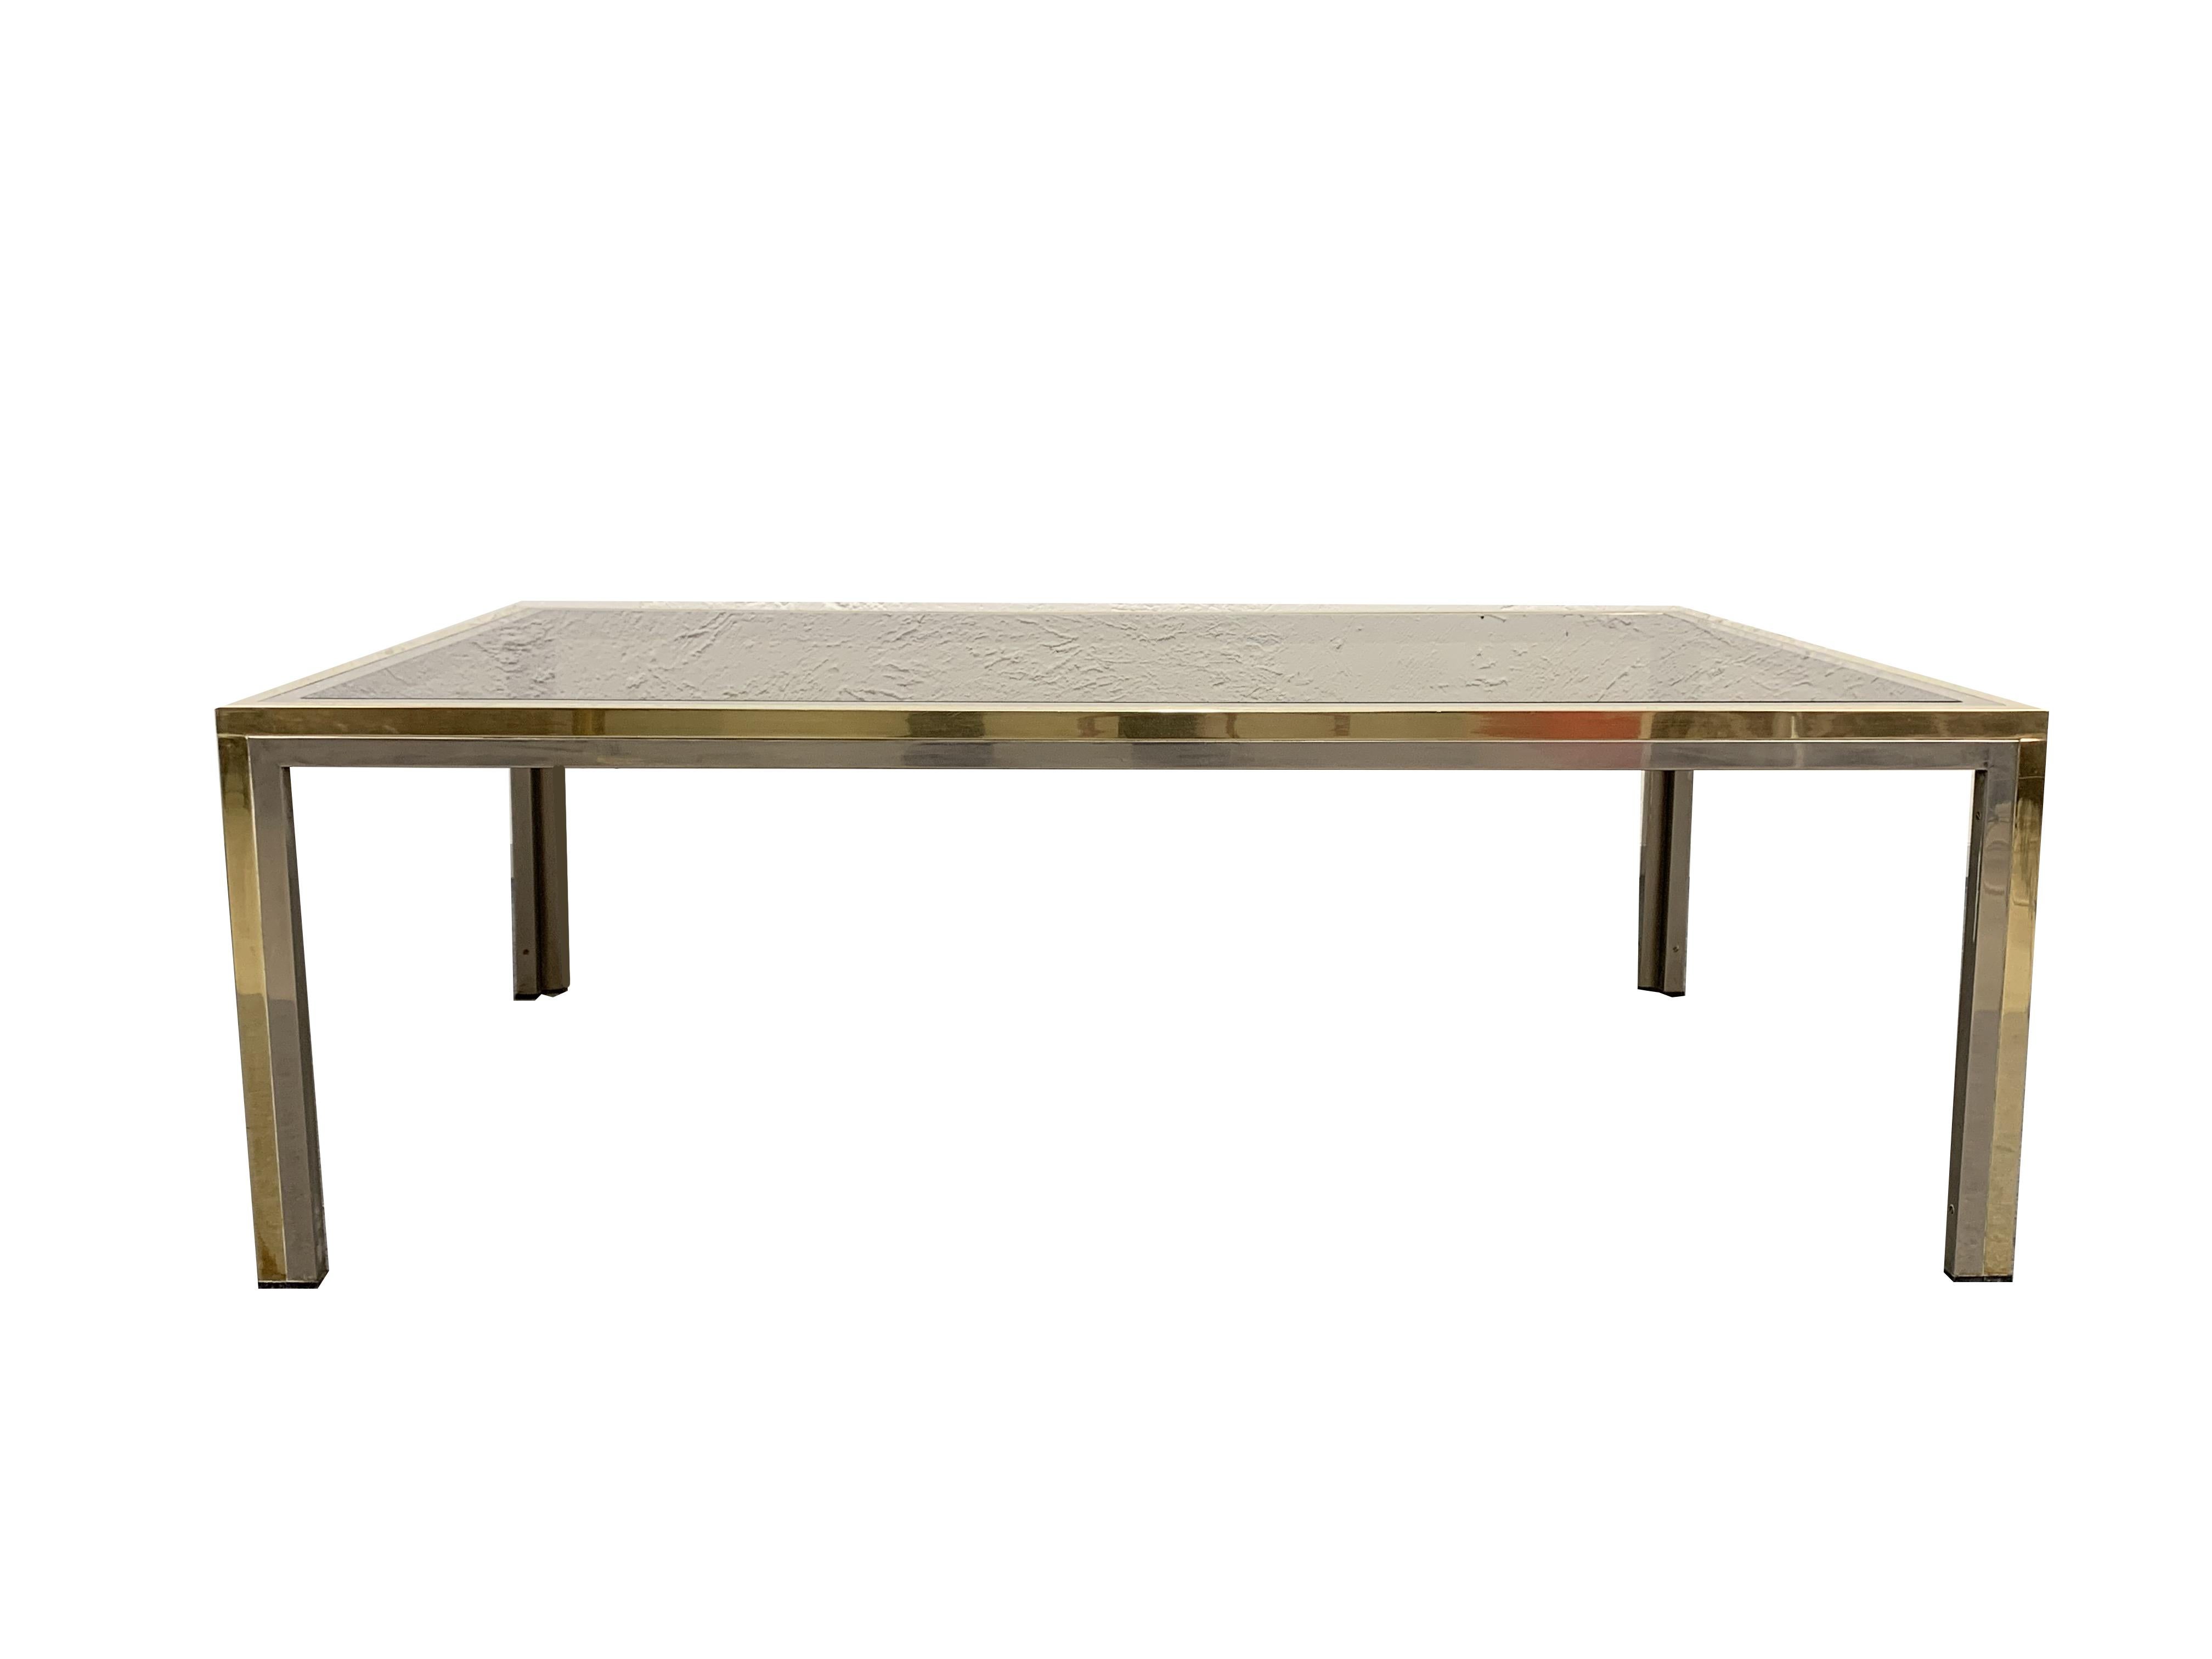 This iconic coffee table was designed in the style of Romeo Rega, one of the few 1970s-era Italian designers that are associated with a combination of modernism and glamour in their furniture creations.

Like most of Rega's production, this